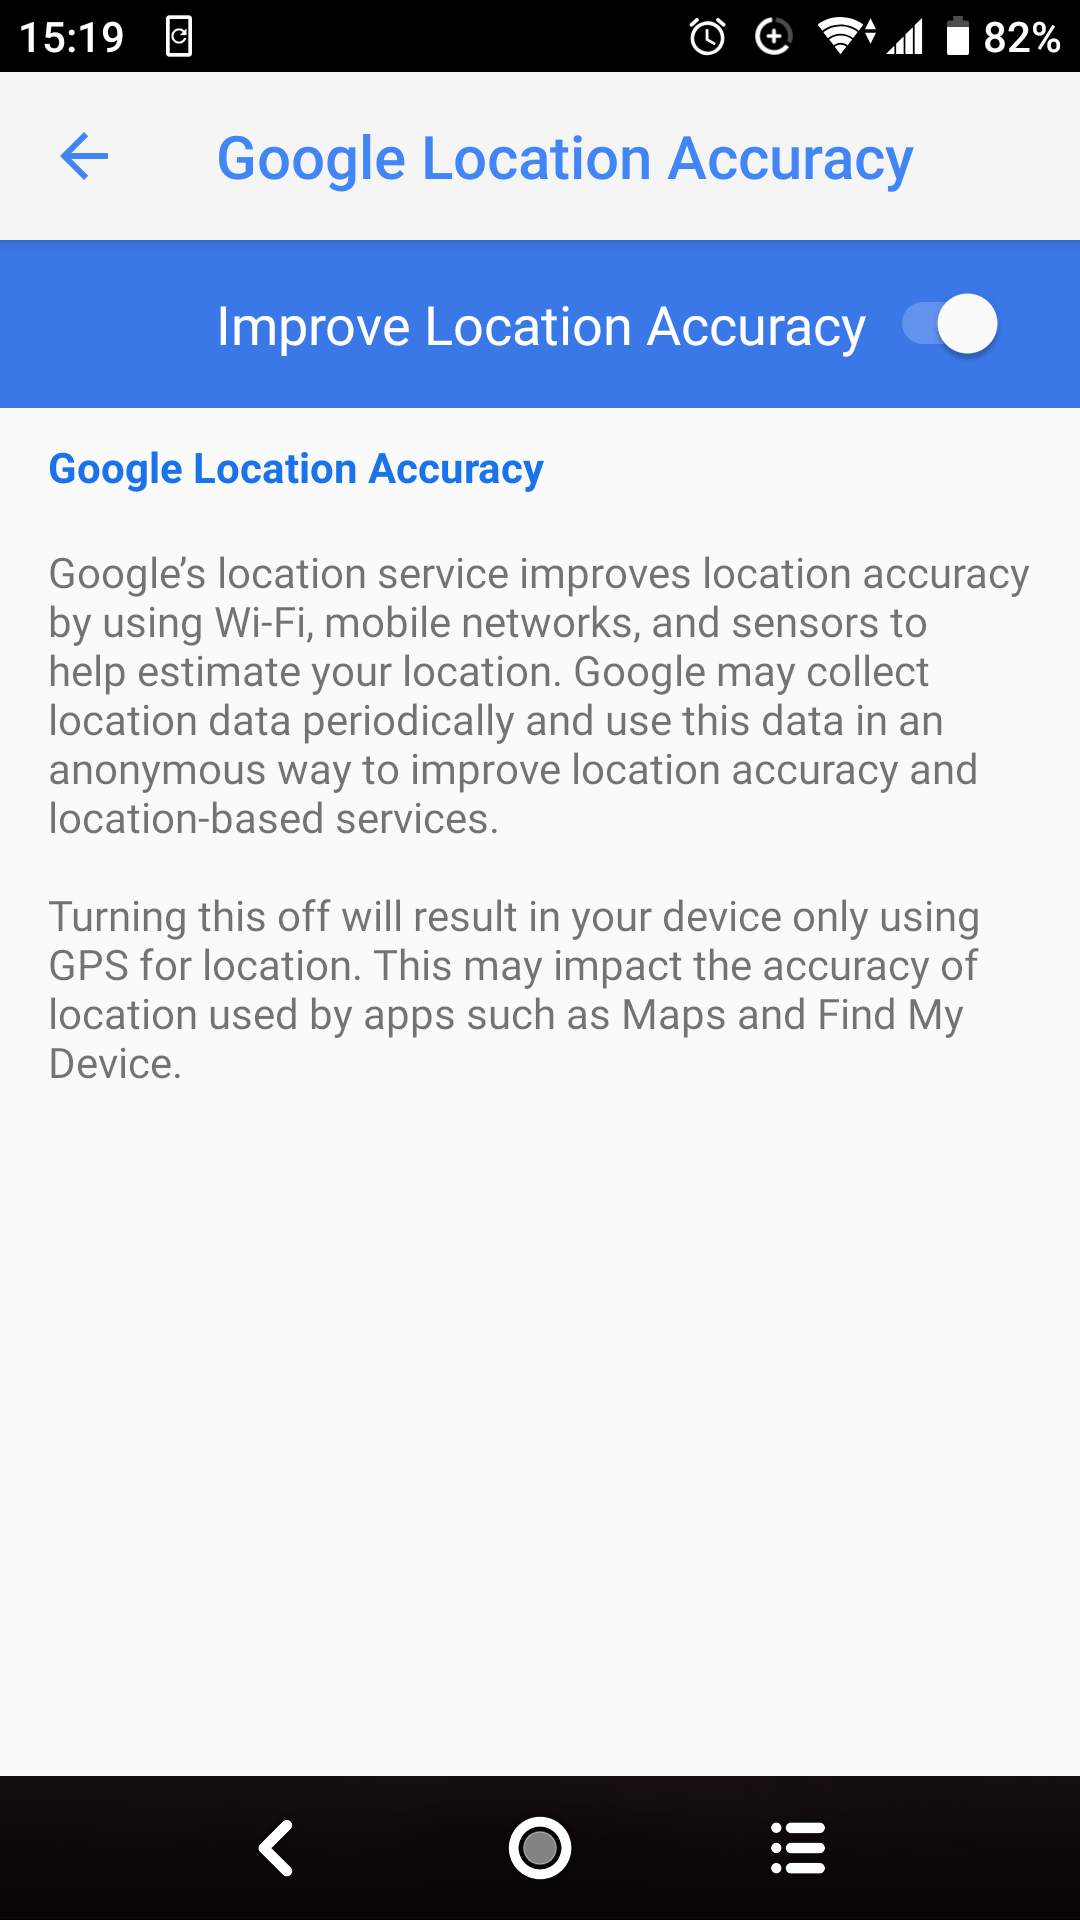 Android 9.0 and up: How to improve location accuracy